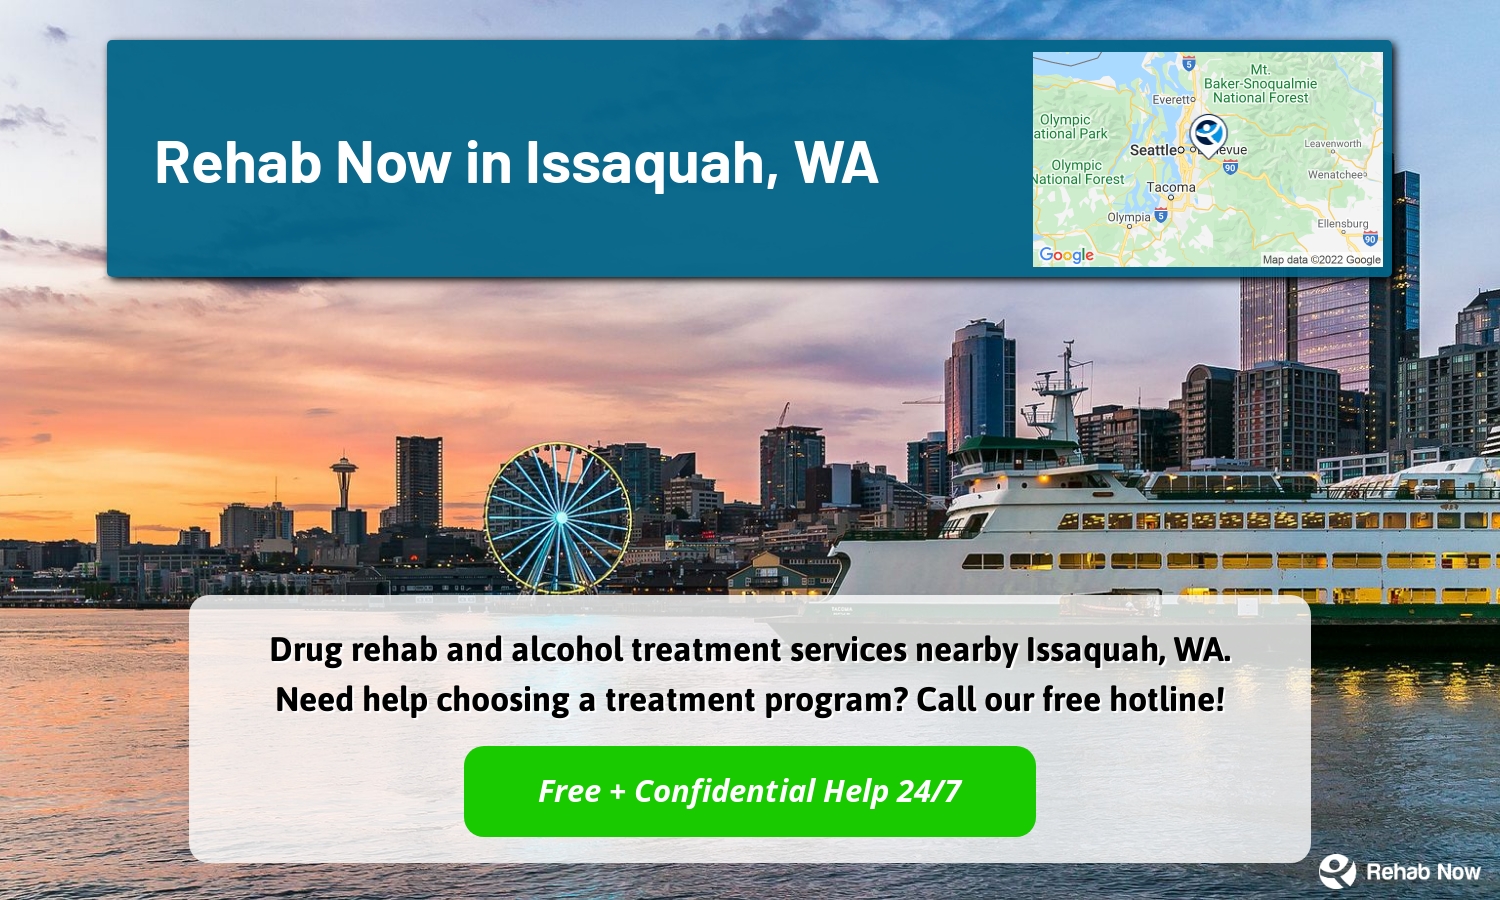 Drug rehab and alcohol treatment services nearby Issaquah, WA. Need help choosing a treatment program? Call our free hotline!